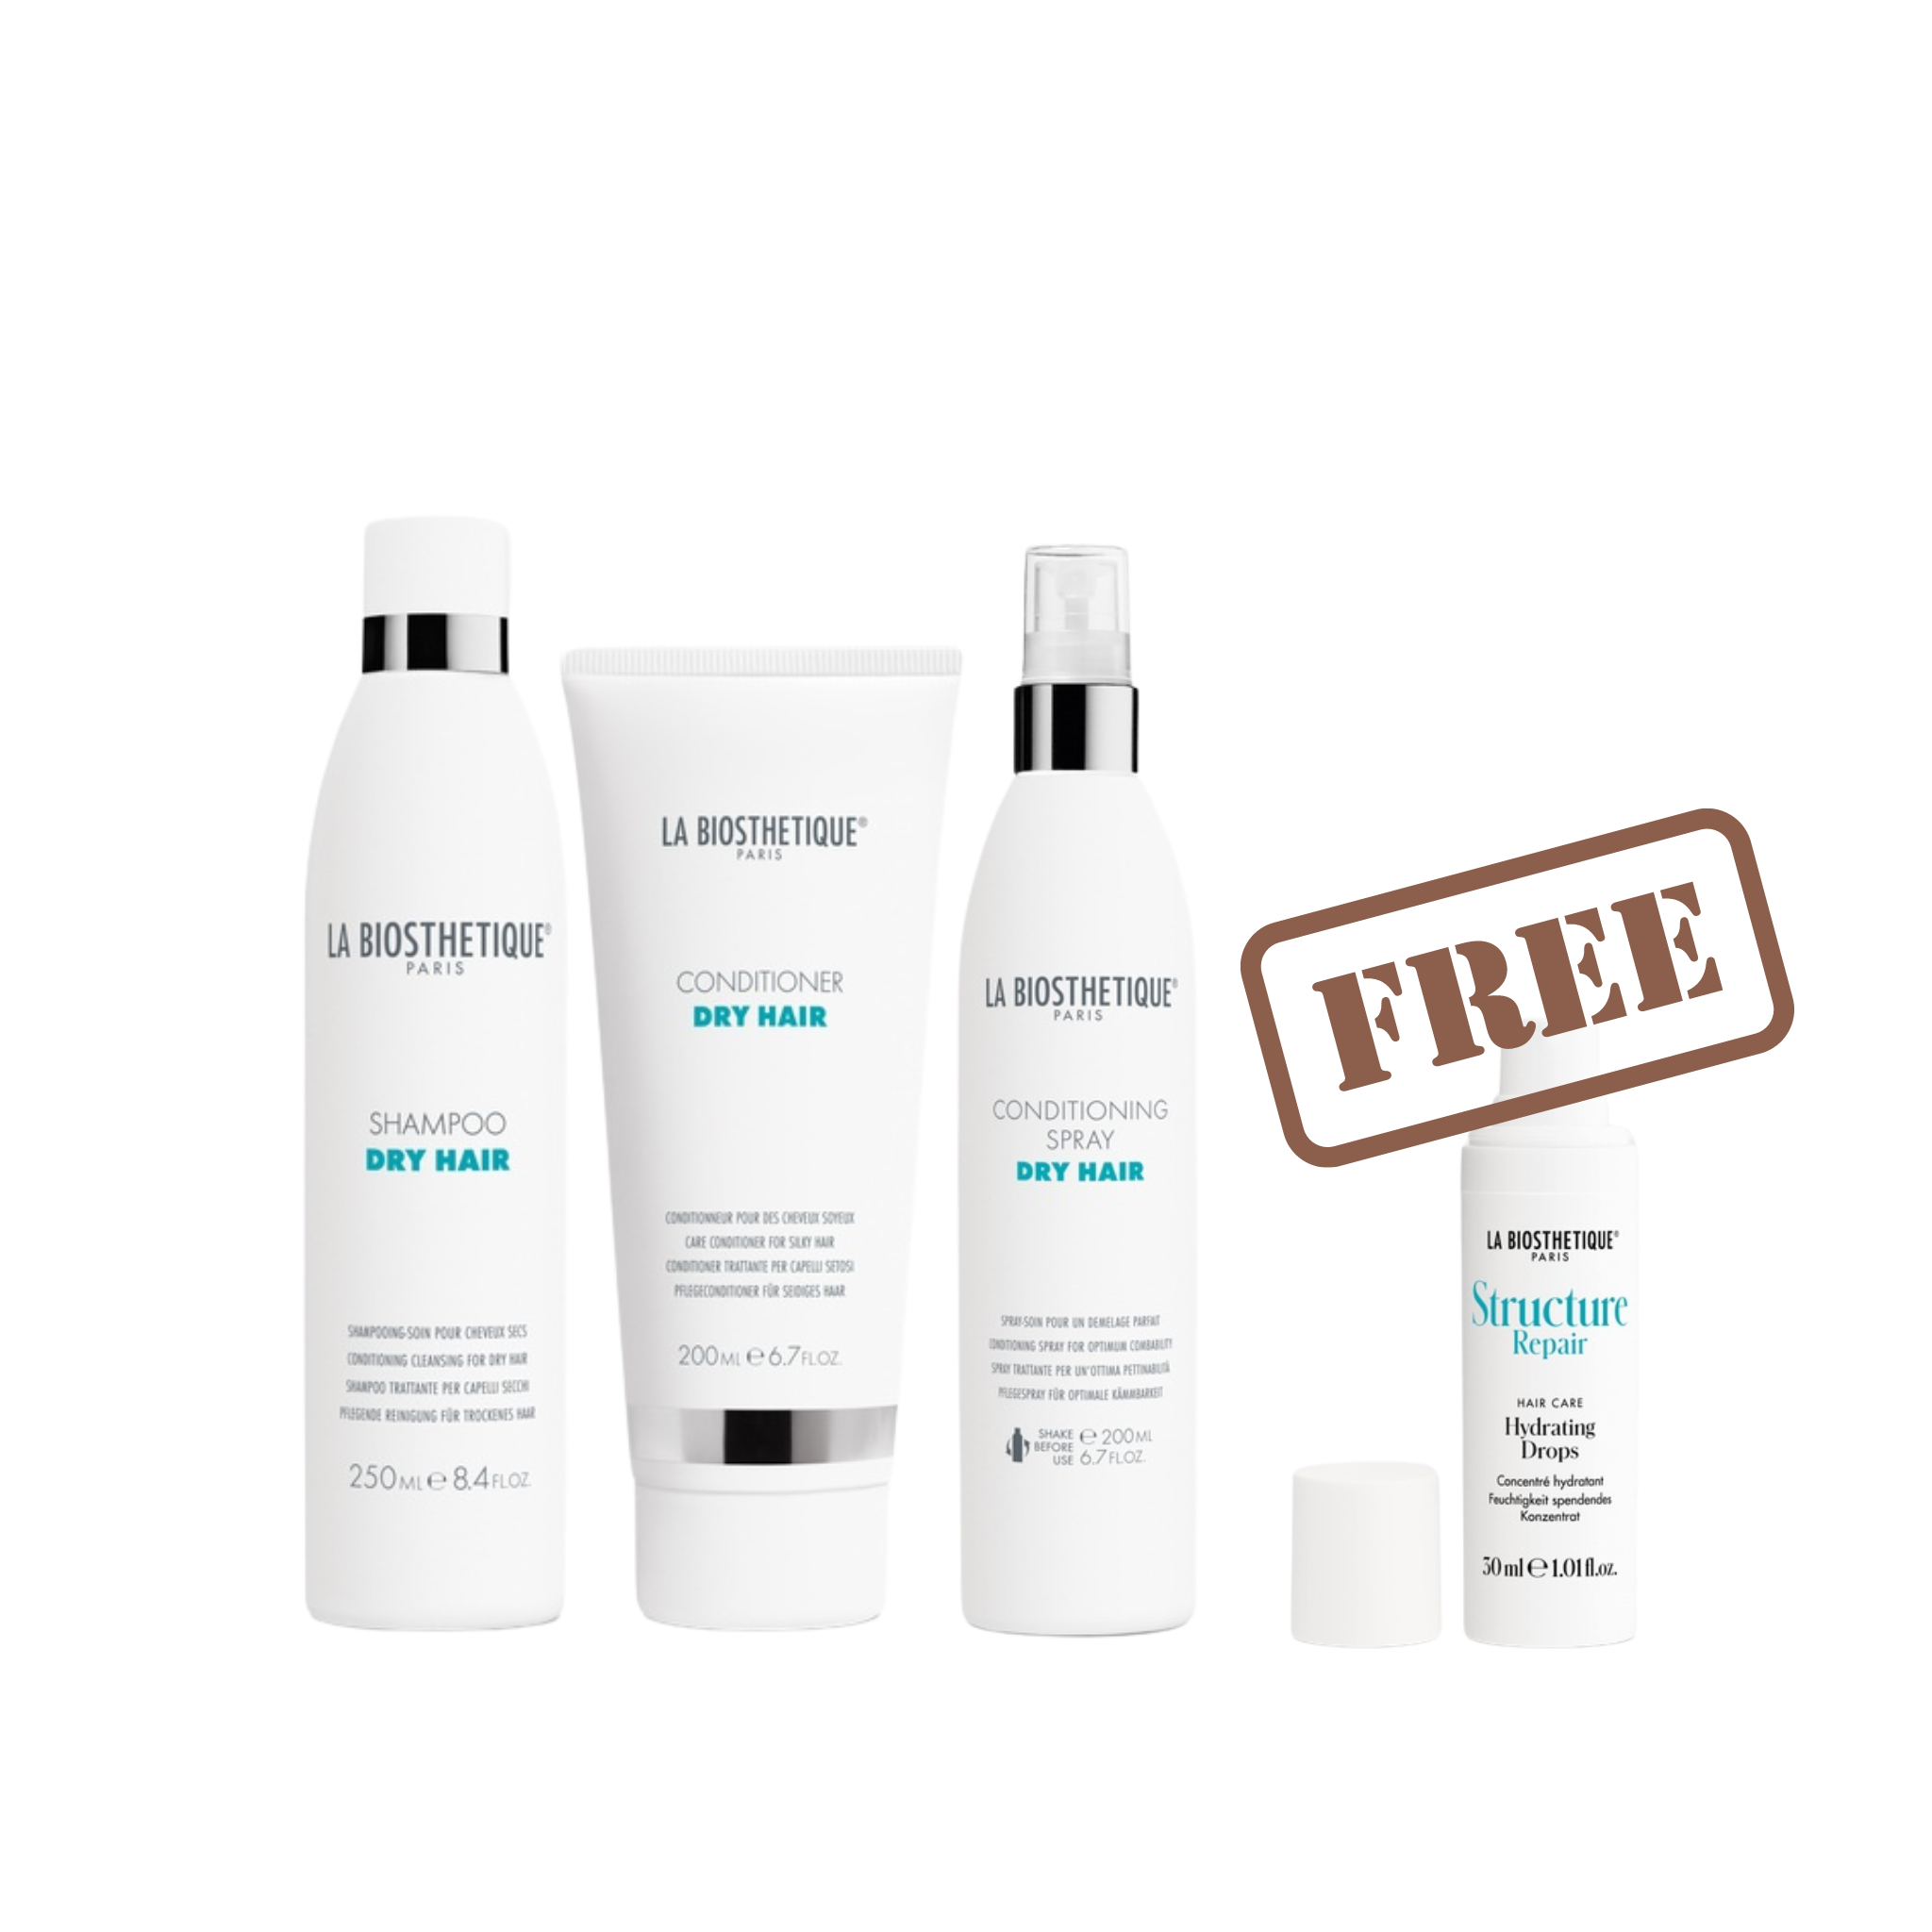 La Biosthetique bundle pack for dry hair that contains shampoo, conditioner and conditioning spray with free product. La Biosthetique Australian stockist. Geelong based. Shop now.